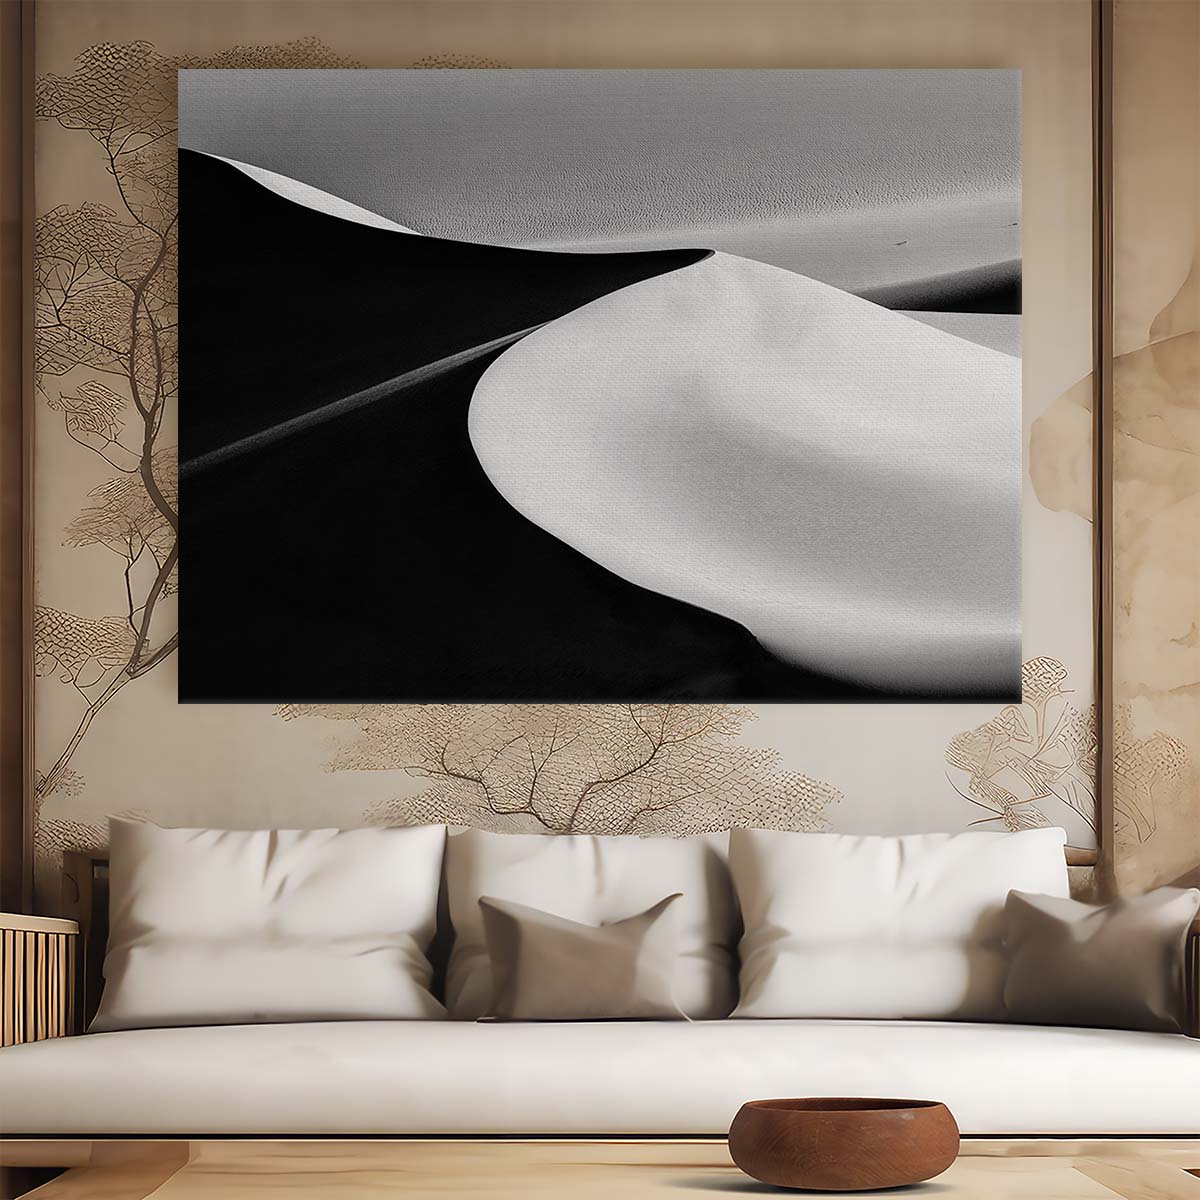 Minimalist Desert Dunes Landscape Abstract Wall Art by Luxuriance Designs. Made in USA.